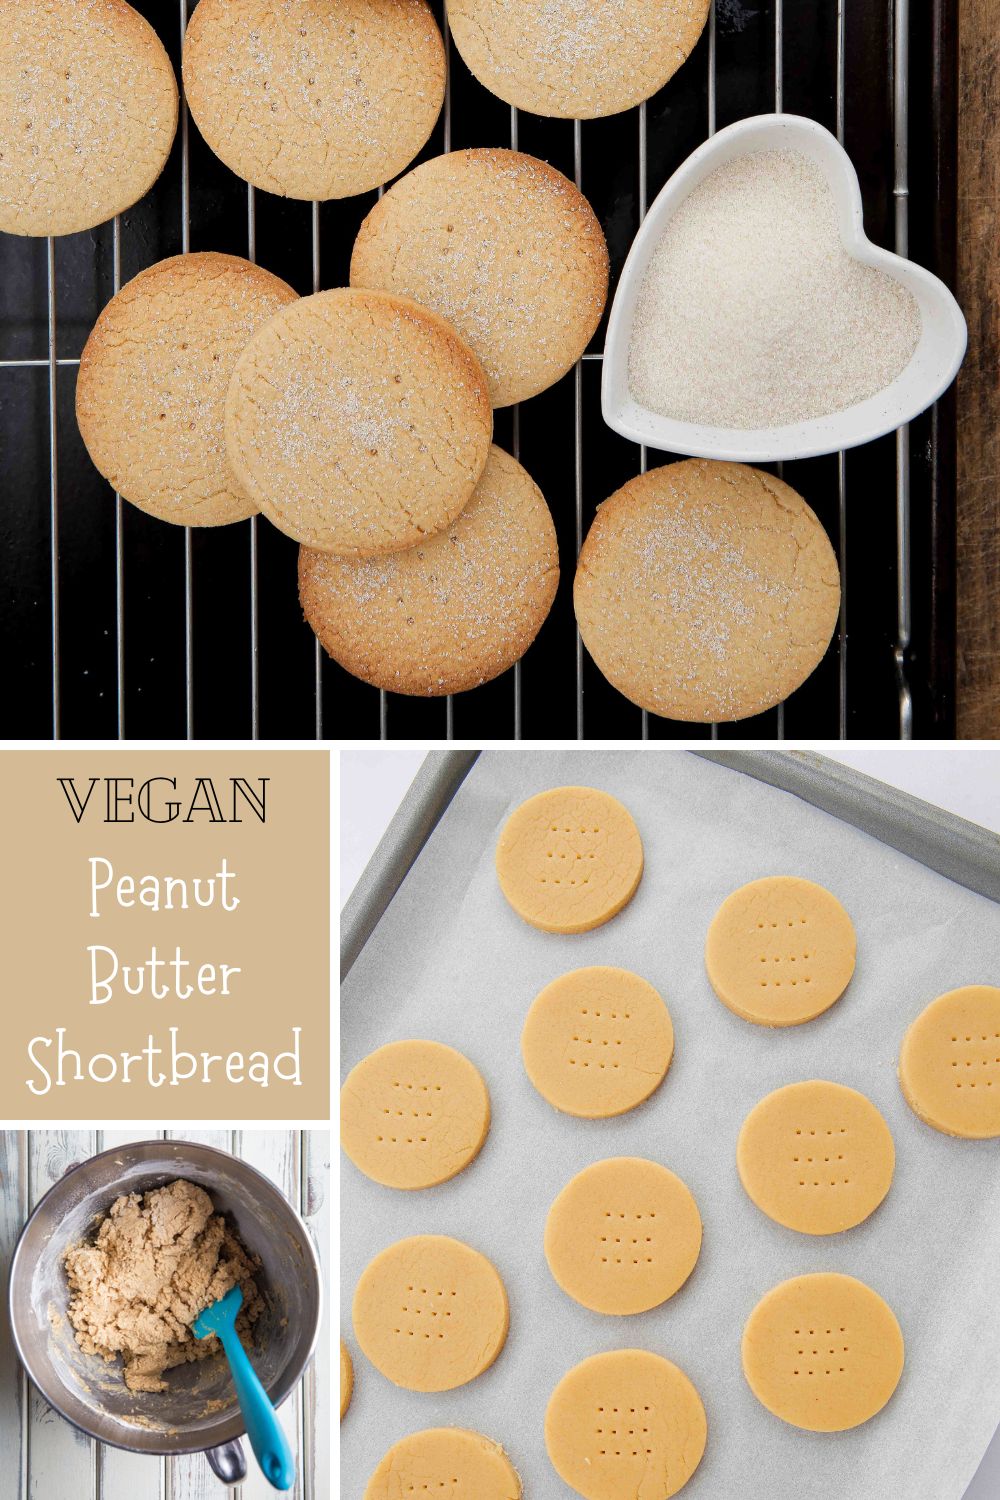 Buttery, melt in the mouth vegan peanut butter shortbread cookies made with just 4 ingredients! Recipe on thecookandhim.com #veganbaking #veganshortbread #peanutbutterrecipes #peanutbutter #shortbreadcookies